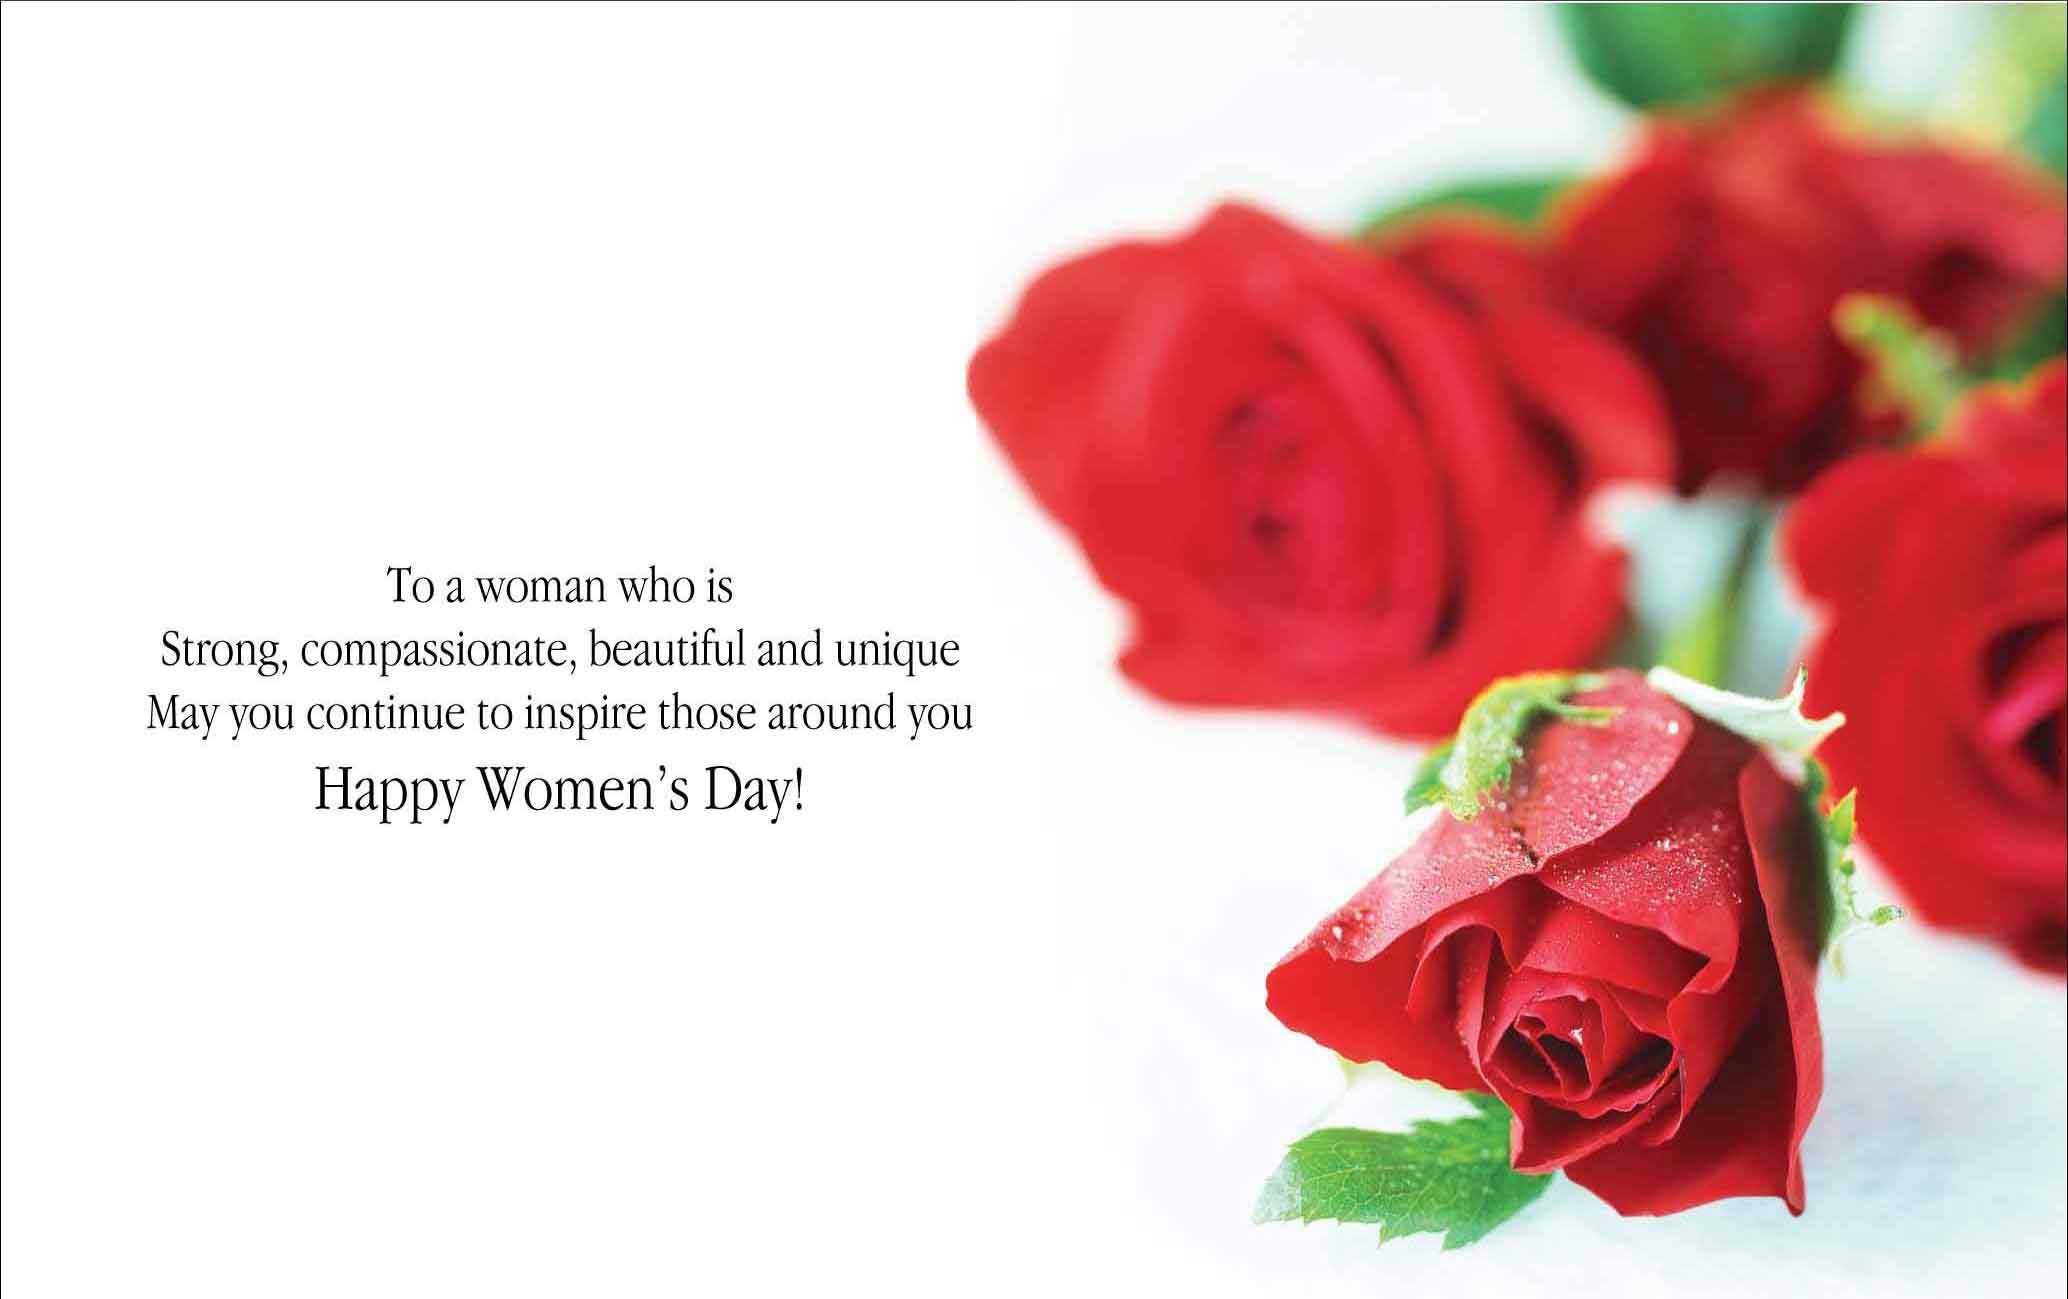 Happy Women's Day Quotes for International Women's Day 2020